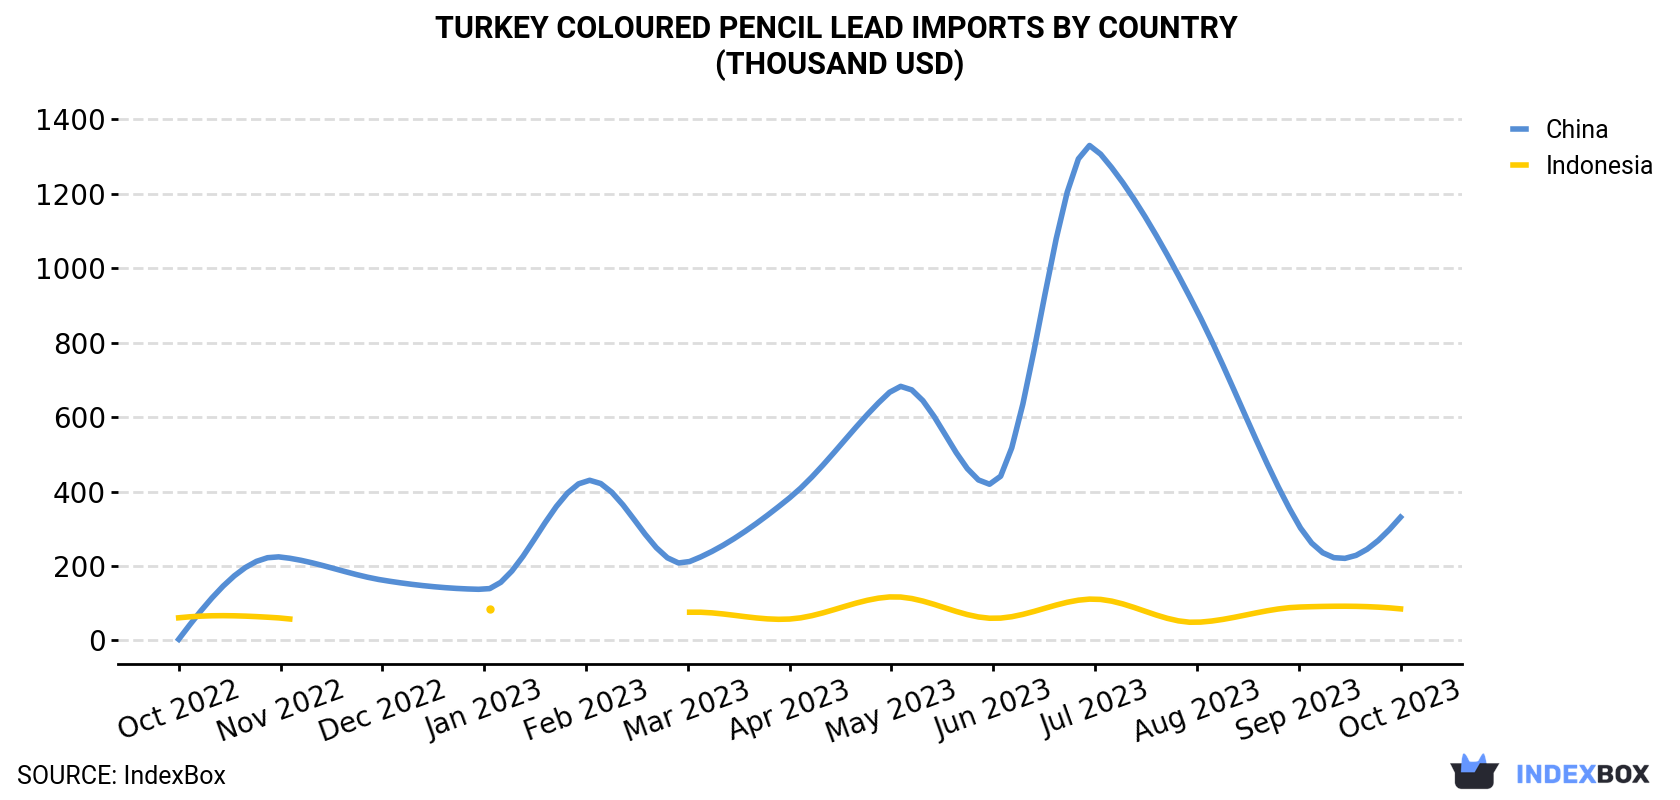 Turkey Coloured Pencil Lead Imports By Country (Thousand USD)